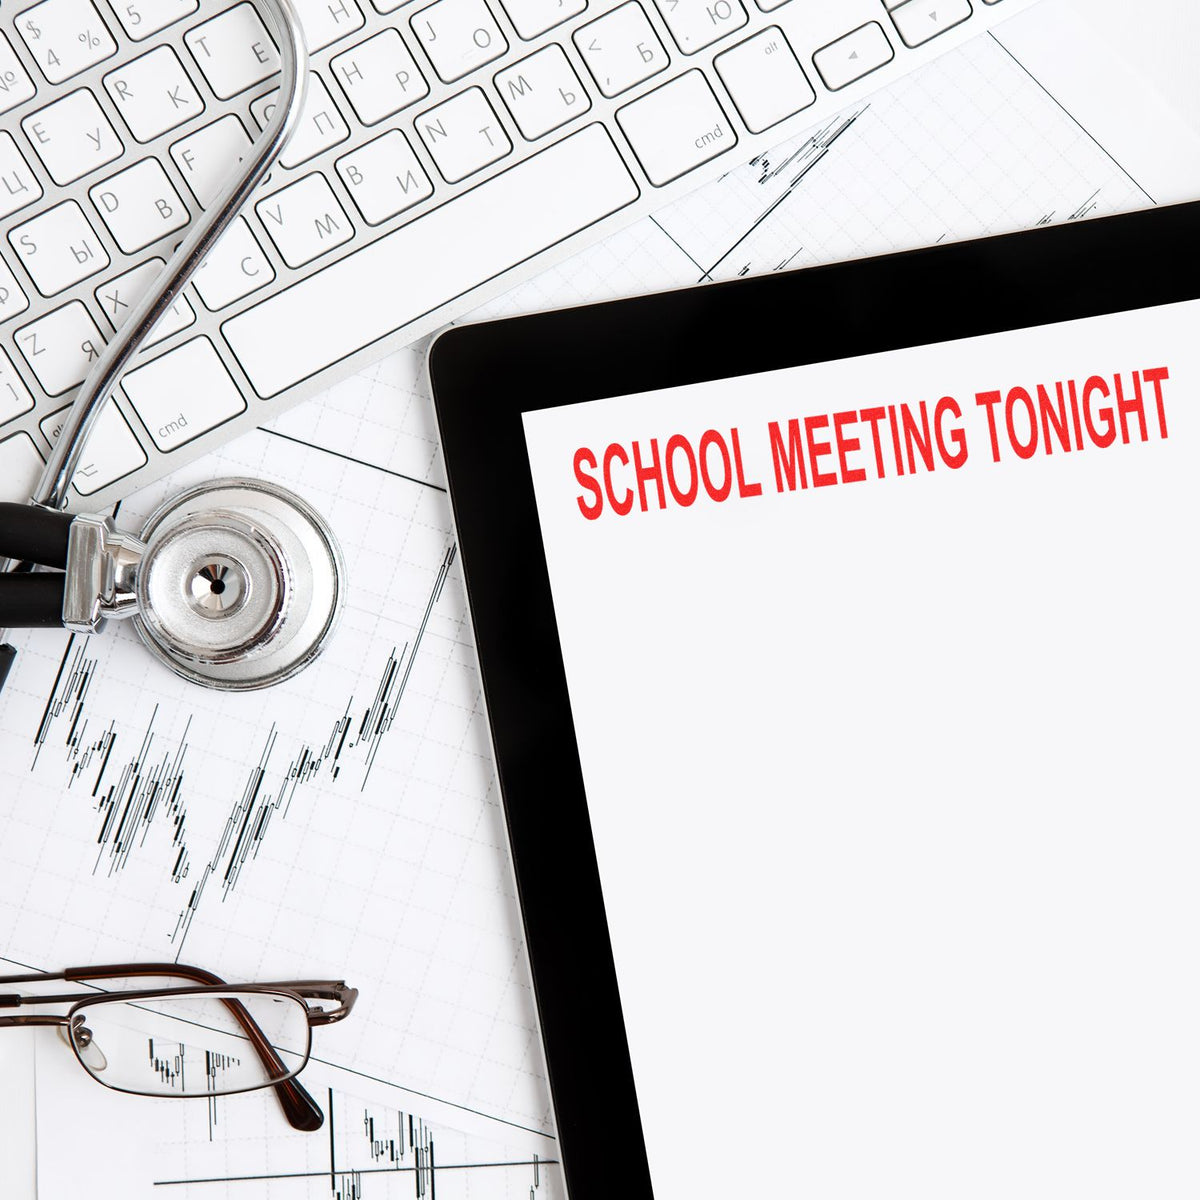 Large School Meeting Tonight Rubber Stamp In Use Photo